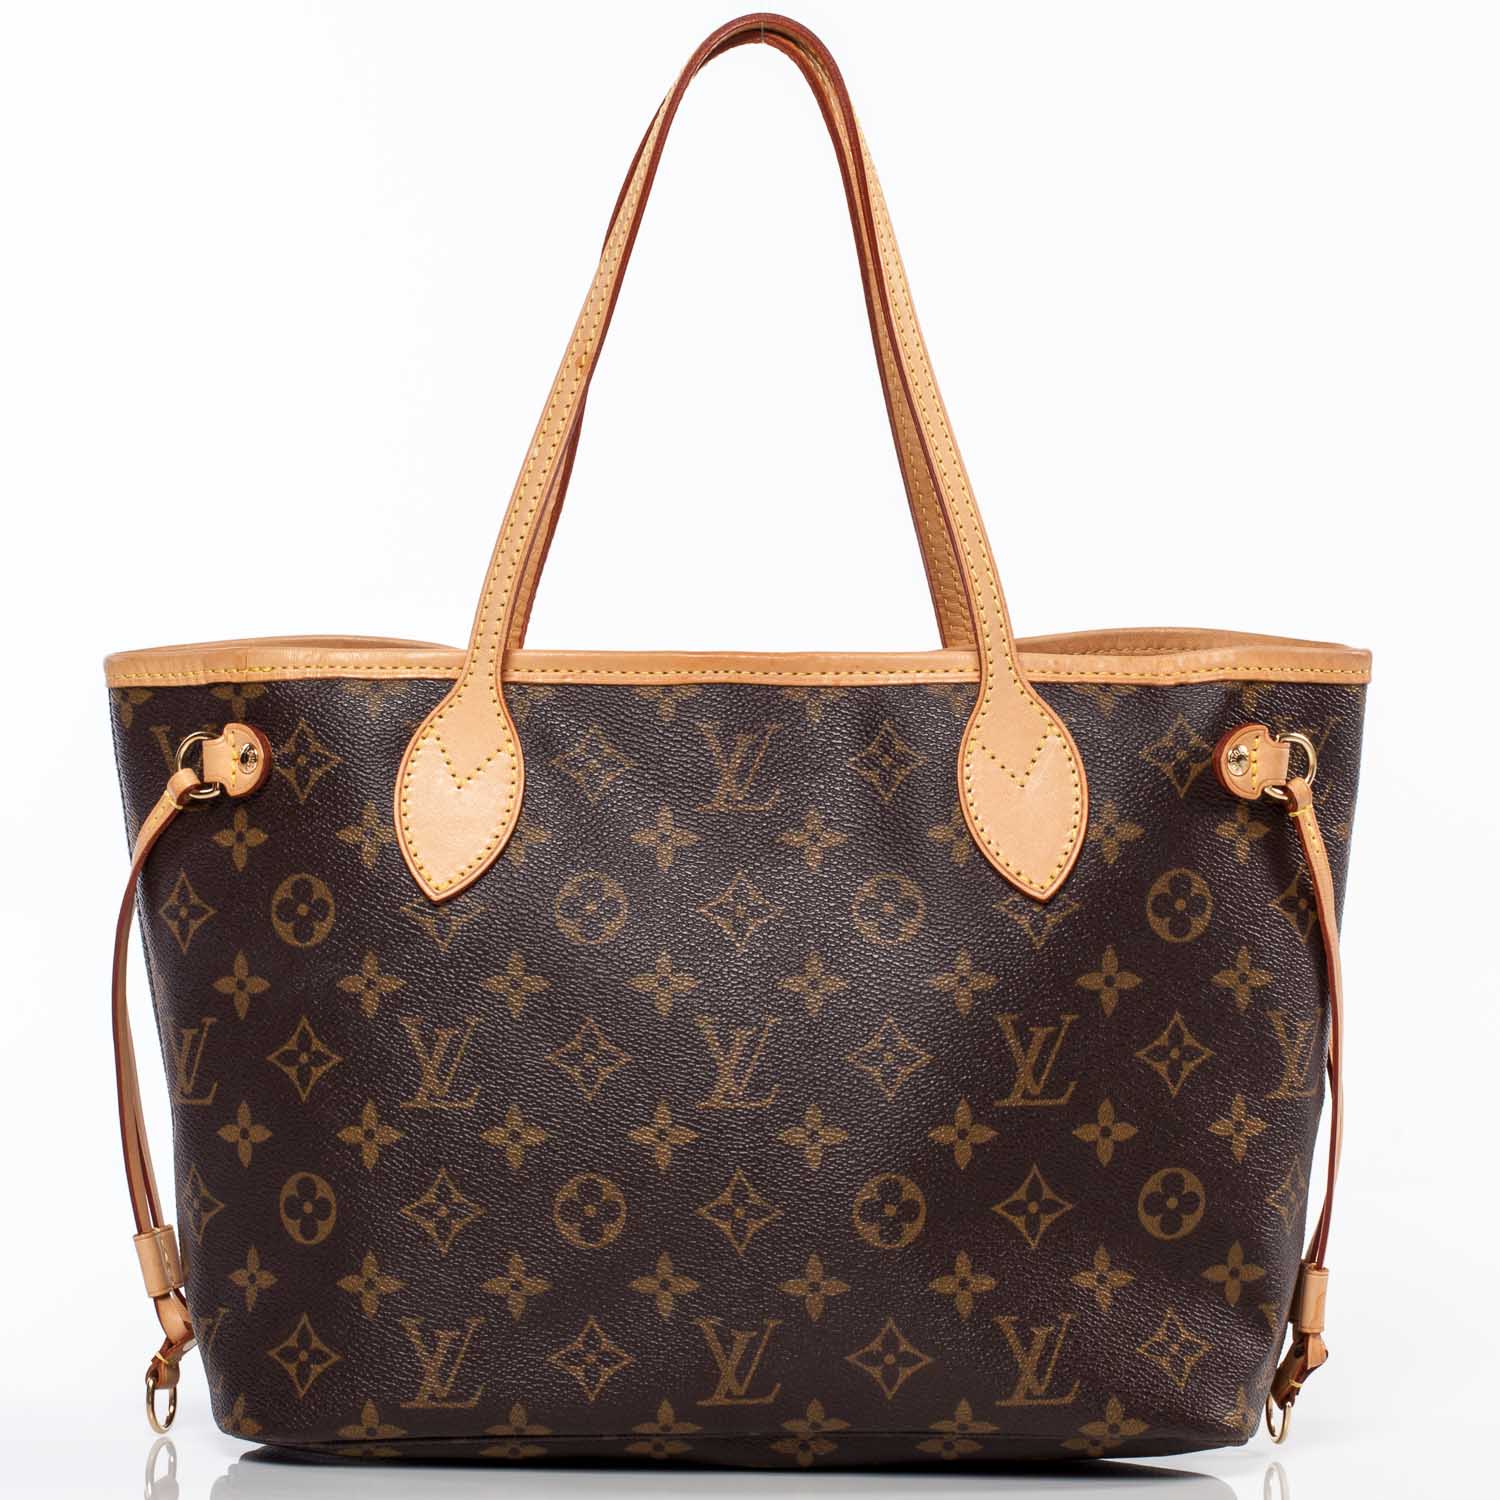 What Is Louis Vuitton Neverfull Bag Made Off | IQS Executive